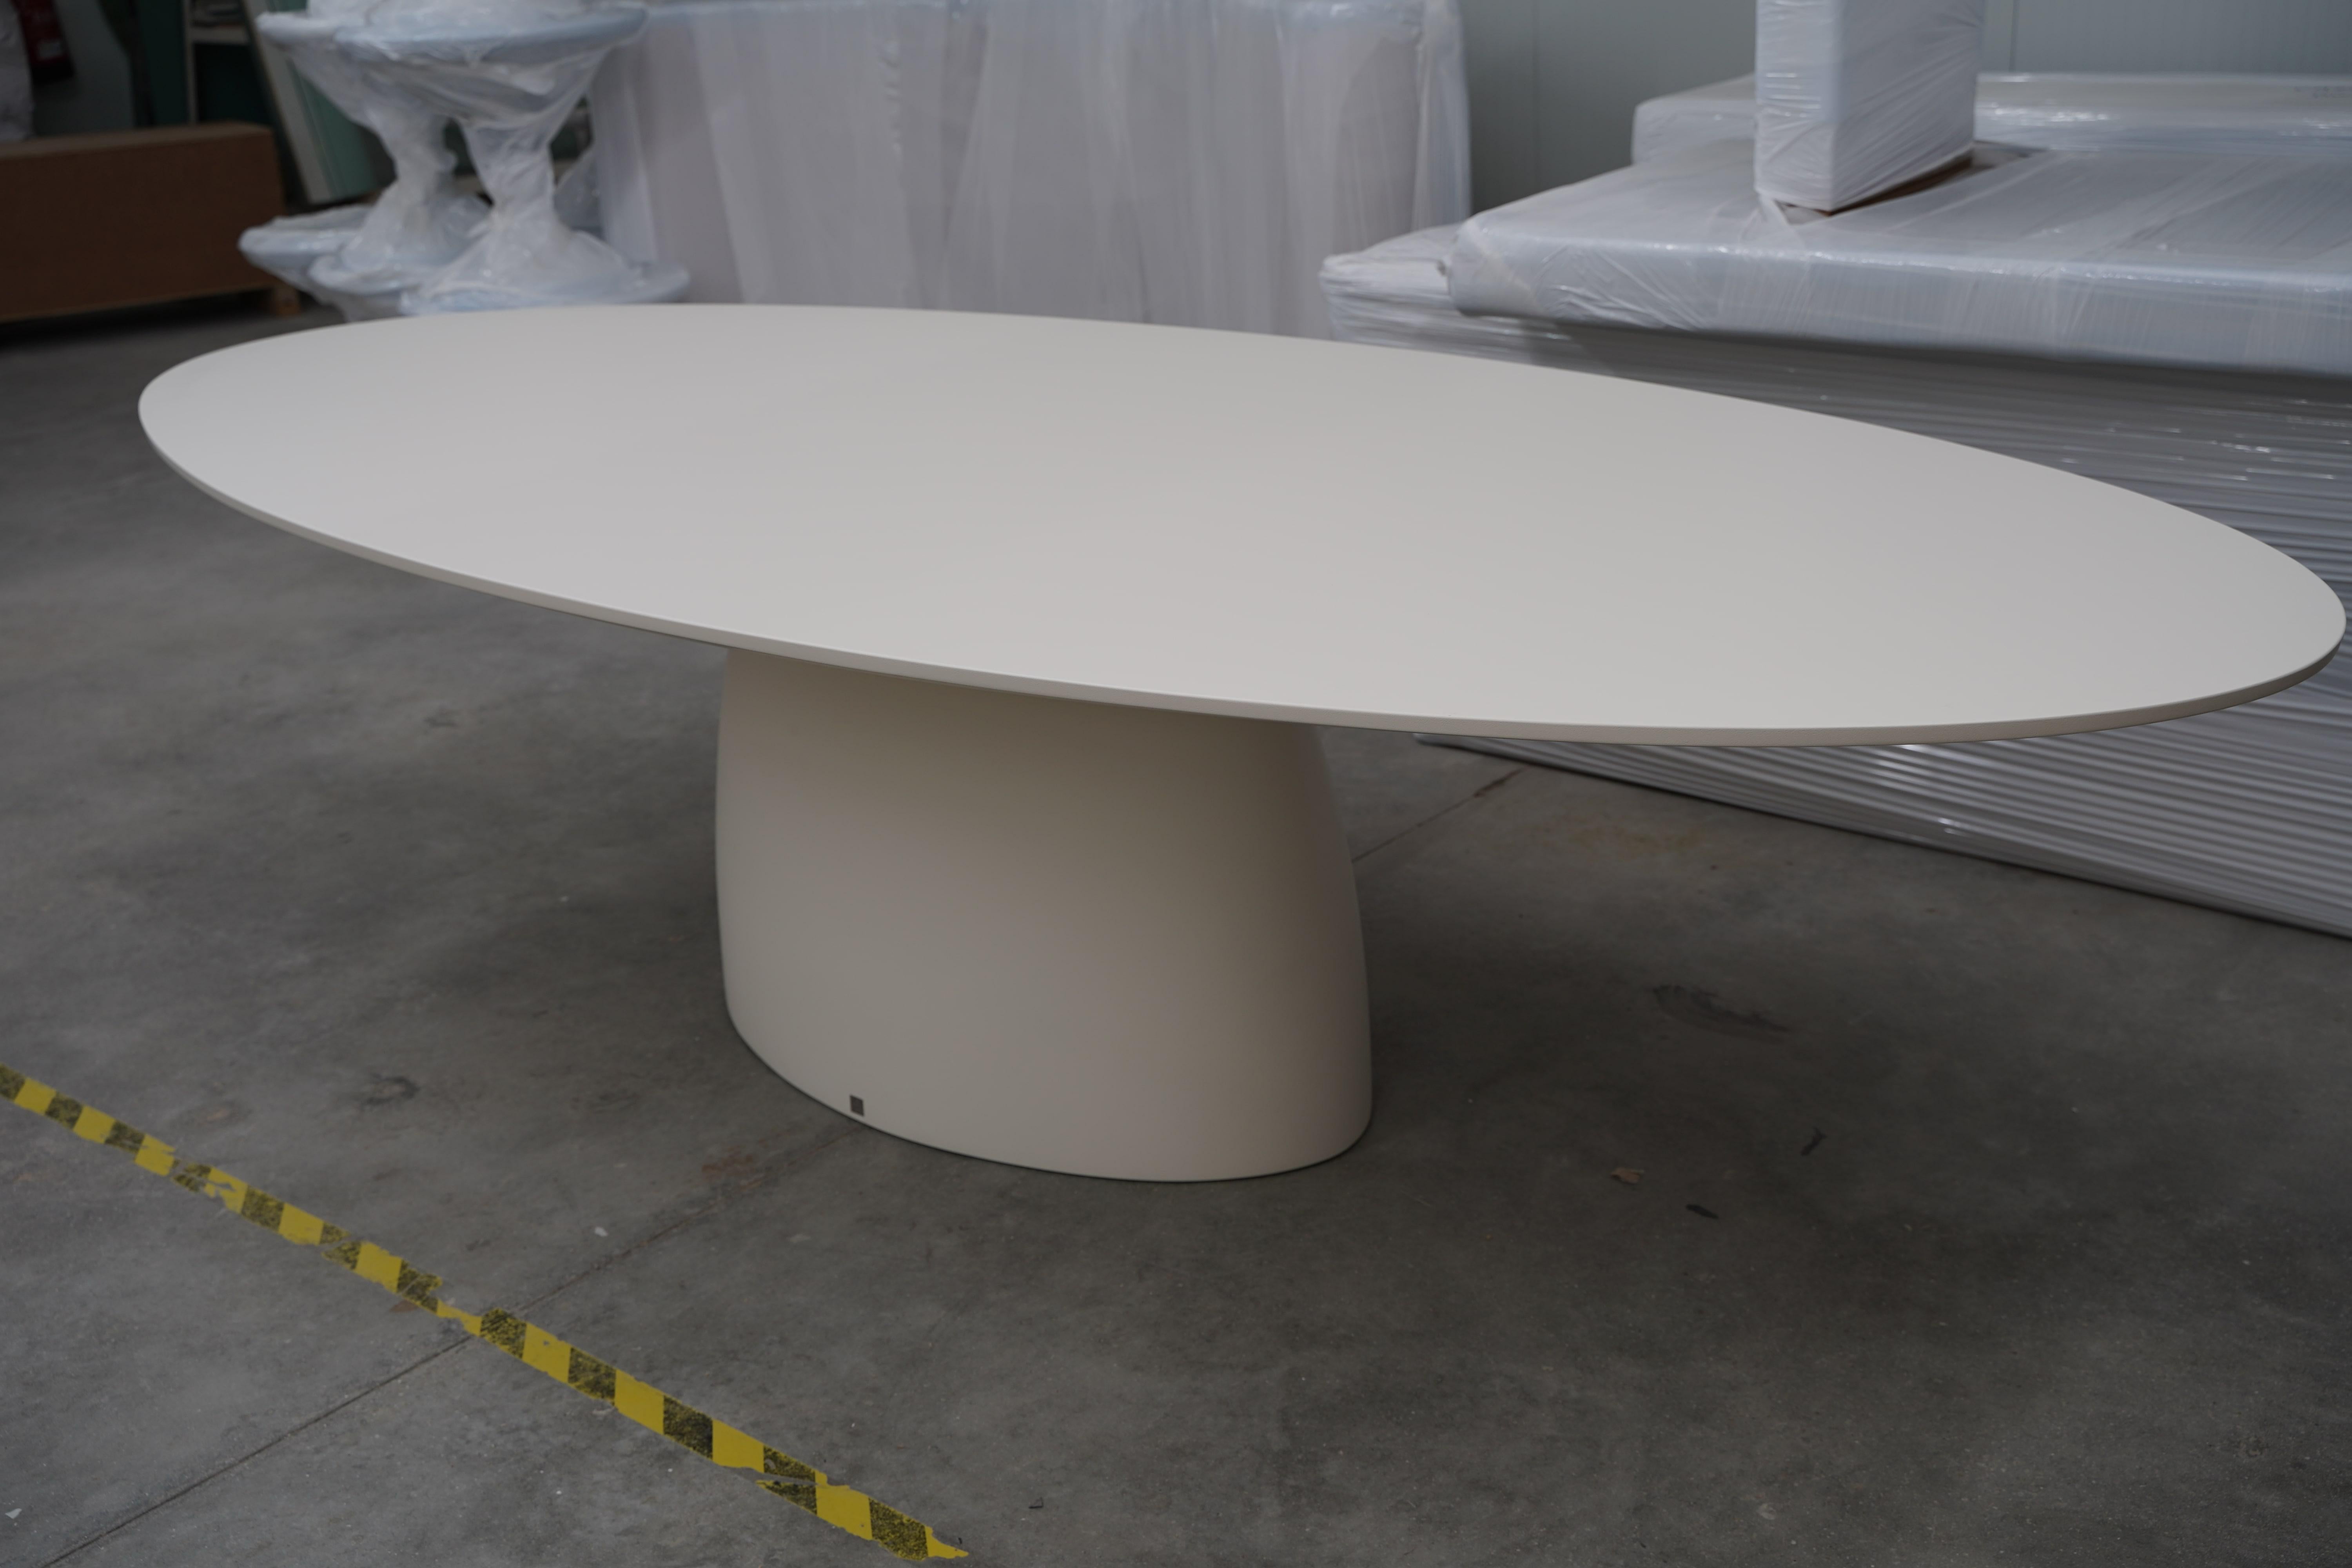 Handcrafted of fiber reinforced resin, a forceful material for extreme weather conditions. 
Lacquered in matte white with protective UV coat.
Dimensions (cm): 300 x 130 x 75
Dimensions (in): 118.1 x 51.2 x 29.5
Seat 8 to 10.
This piece is offered in